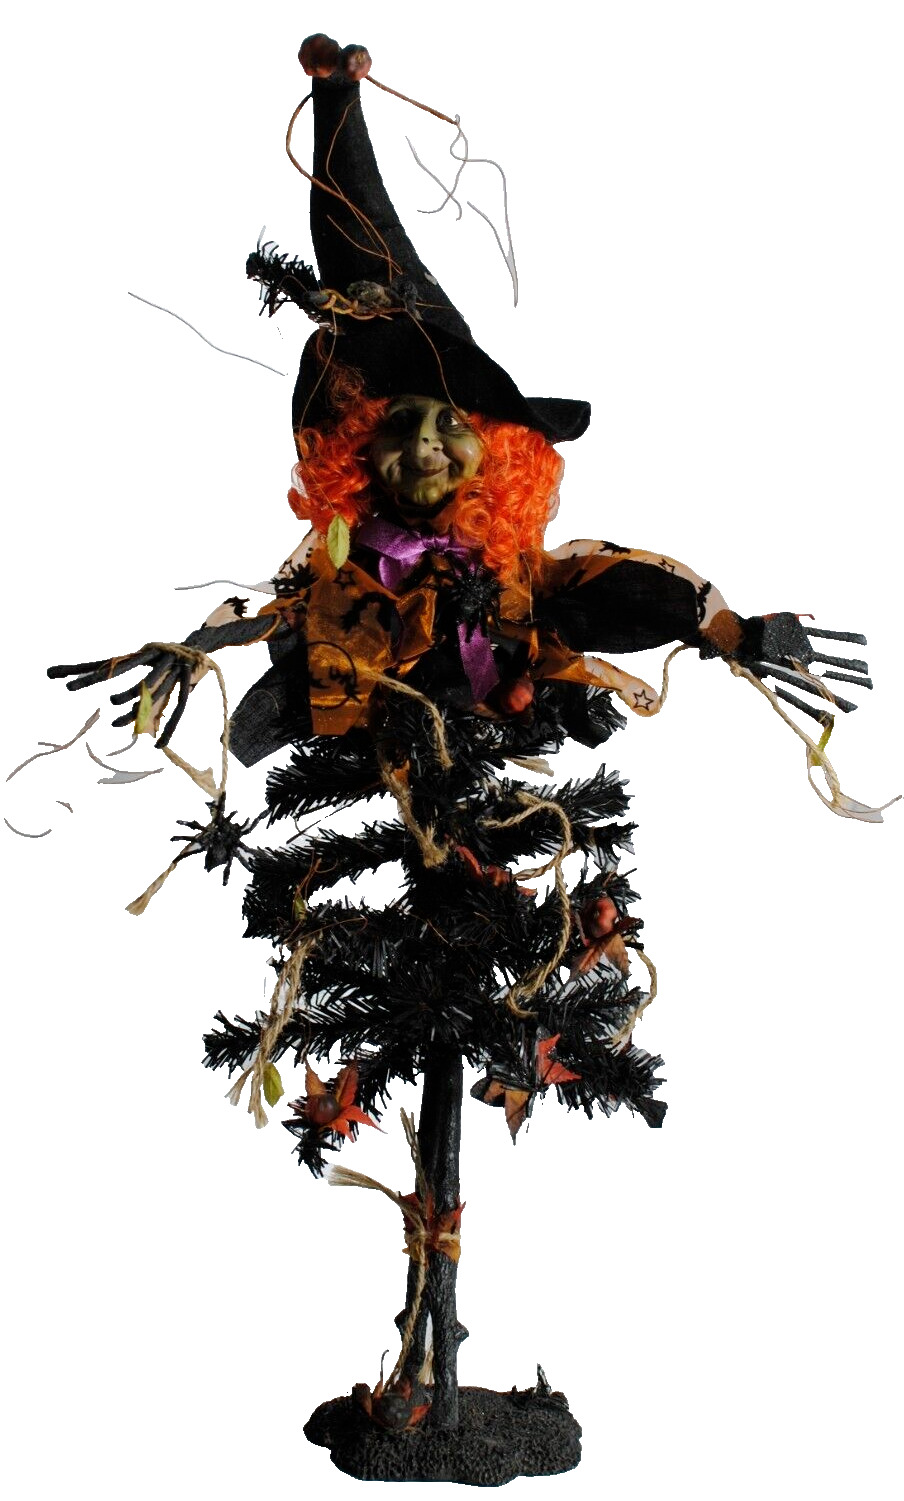 VTG Halloween Black Christmas Tree with Detailed Witches Head Tree-Topper 25 in.